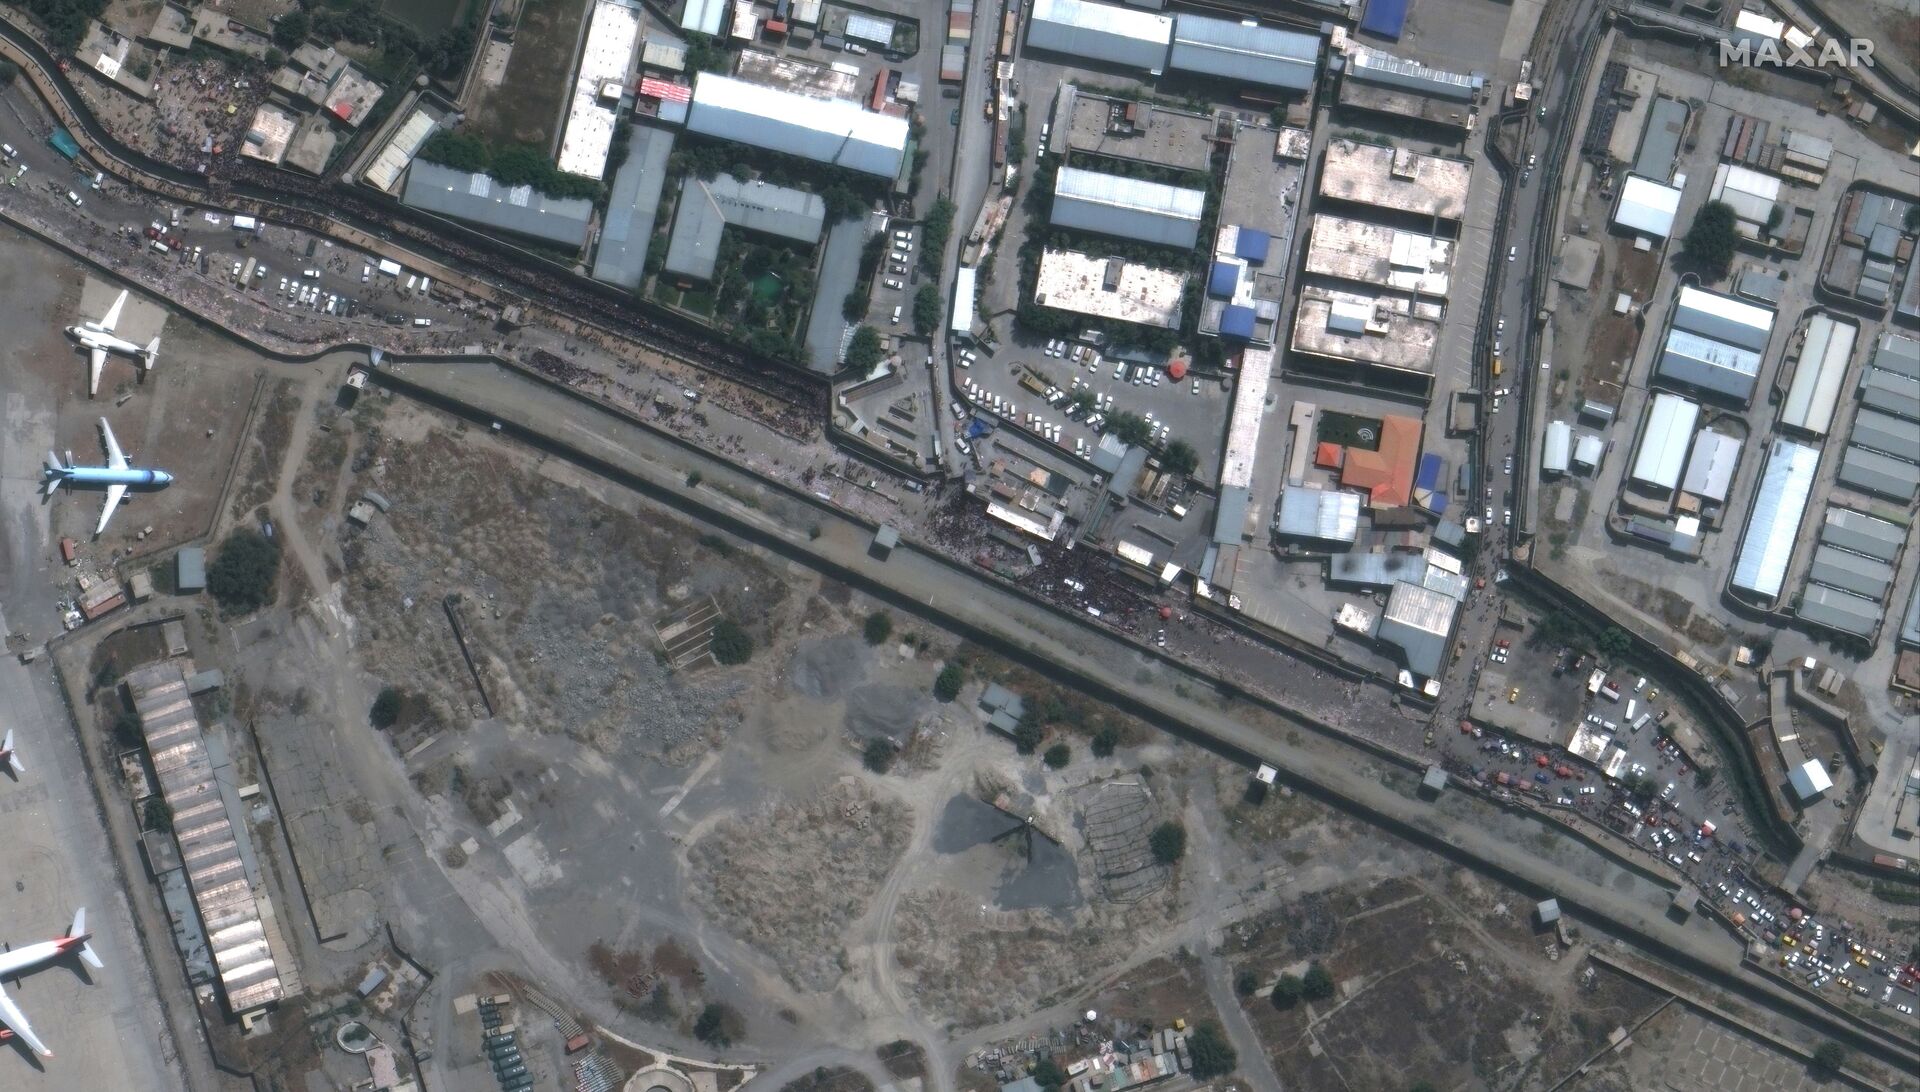 An overview of the Abbey Gate at Hamid Karzai International Airport, in Kabul, Afghanistan August 23, 2021, in this satellite image obtained by Reuters on August 26, 2021. - Sputnik International, 1920, 07.09.2021